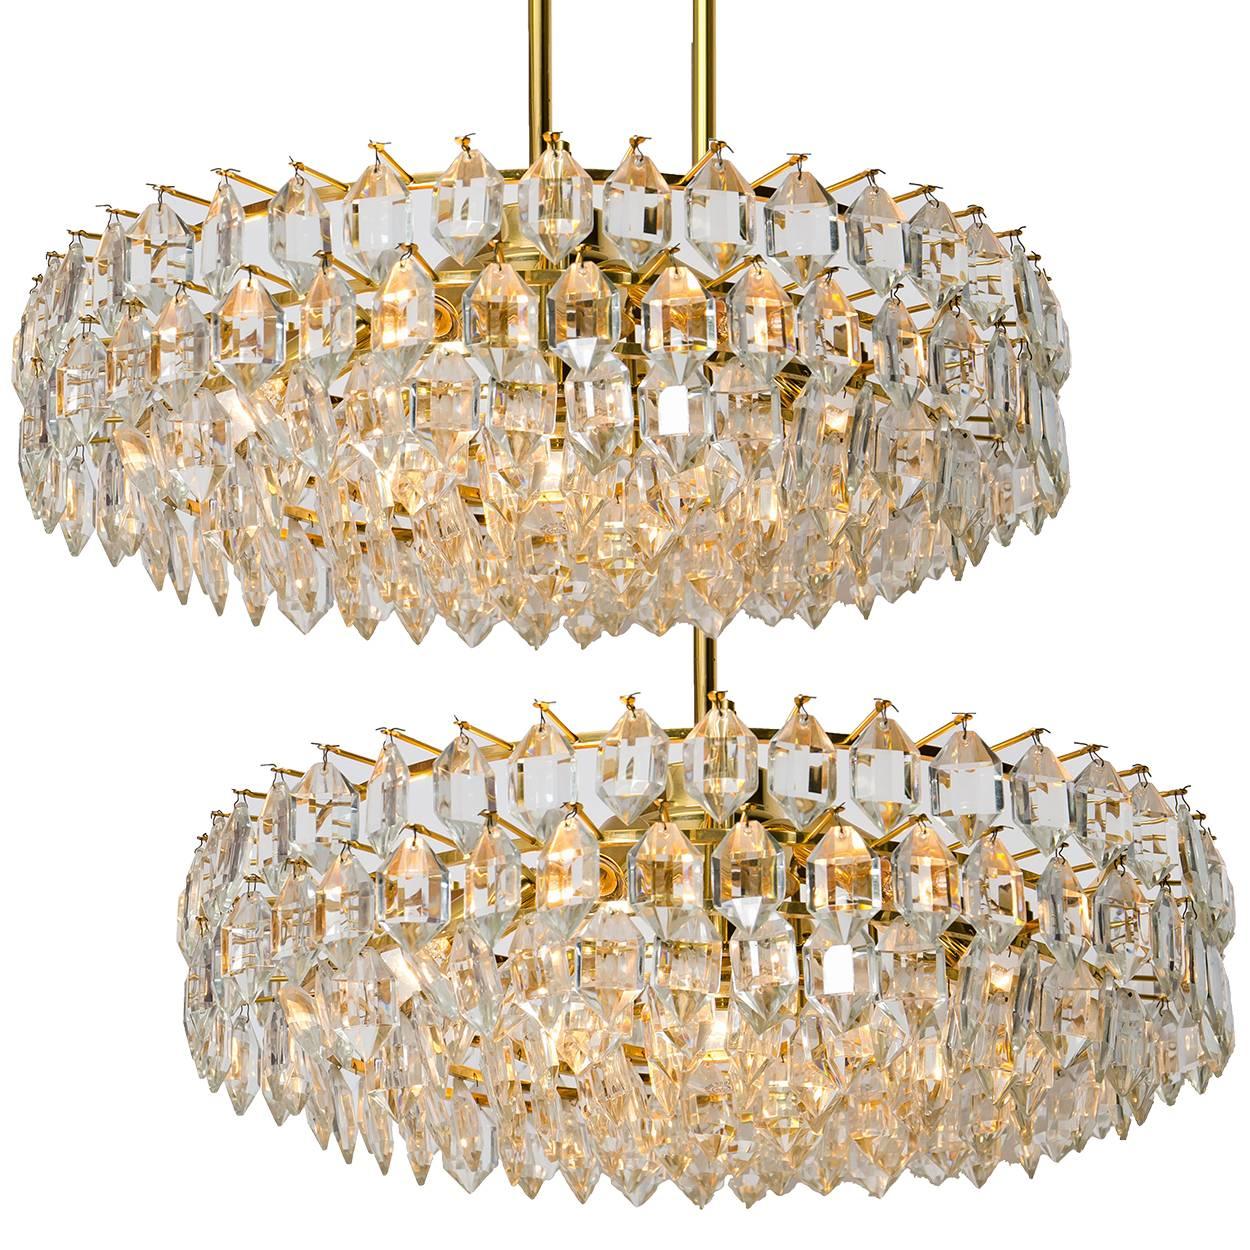 Set of very elegant light fixtures by Bakalowits and Sohne with huge gem-like crystals and brass frame. Two large chandeliers and two wall lights. The crystals are meticulously cut in such a way that radiate the light of the bulbs in different